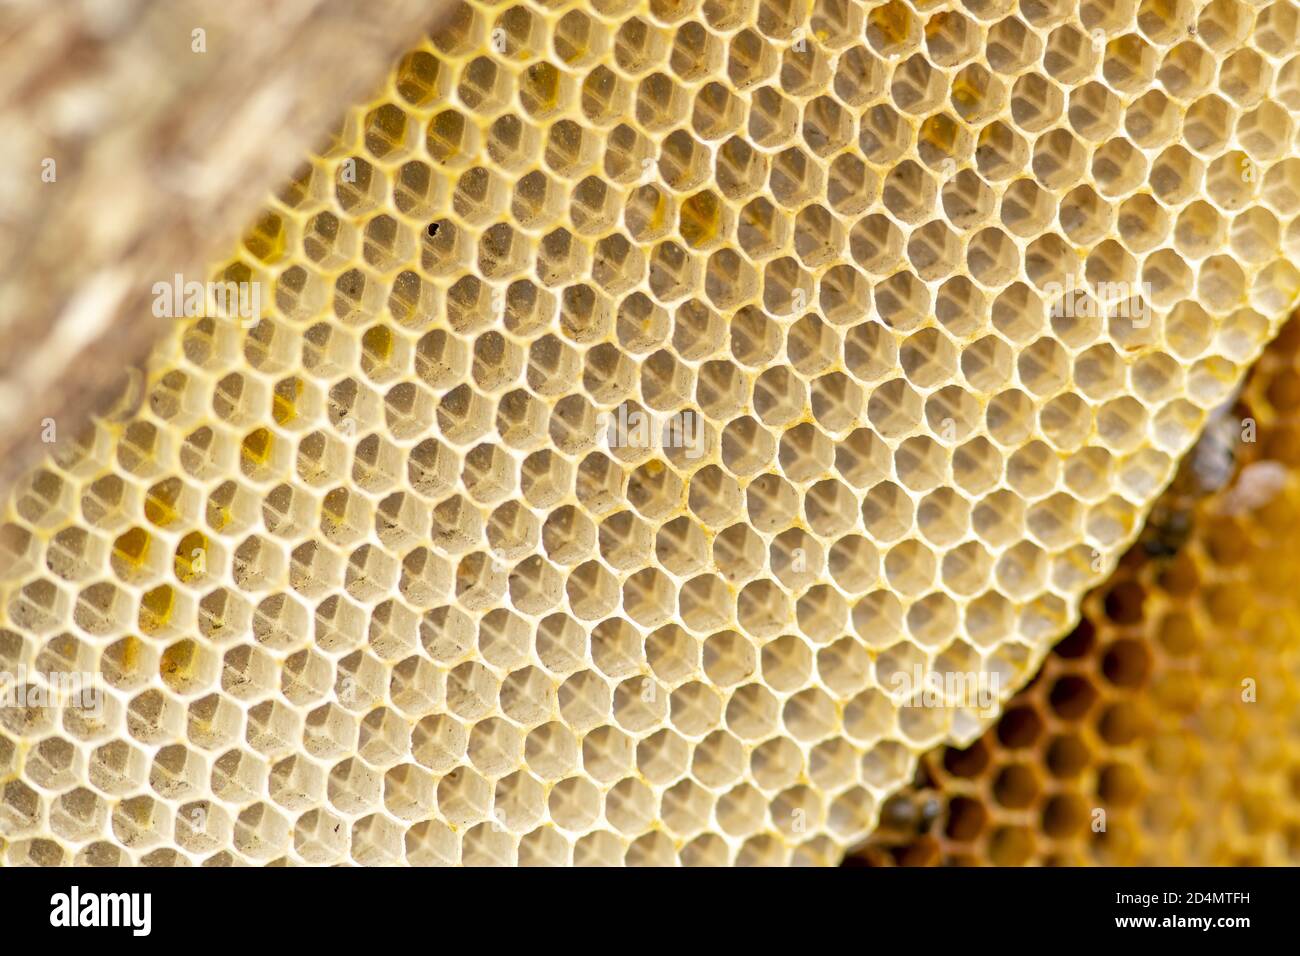 Detailed texture, design and architecture of honebee hive honeycomb Stock Photo